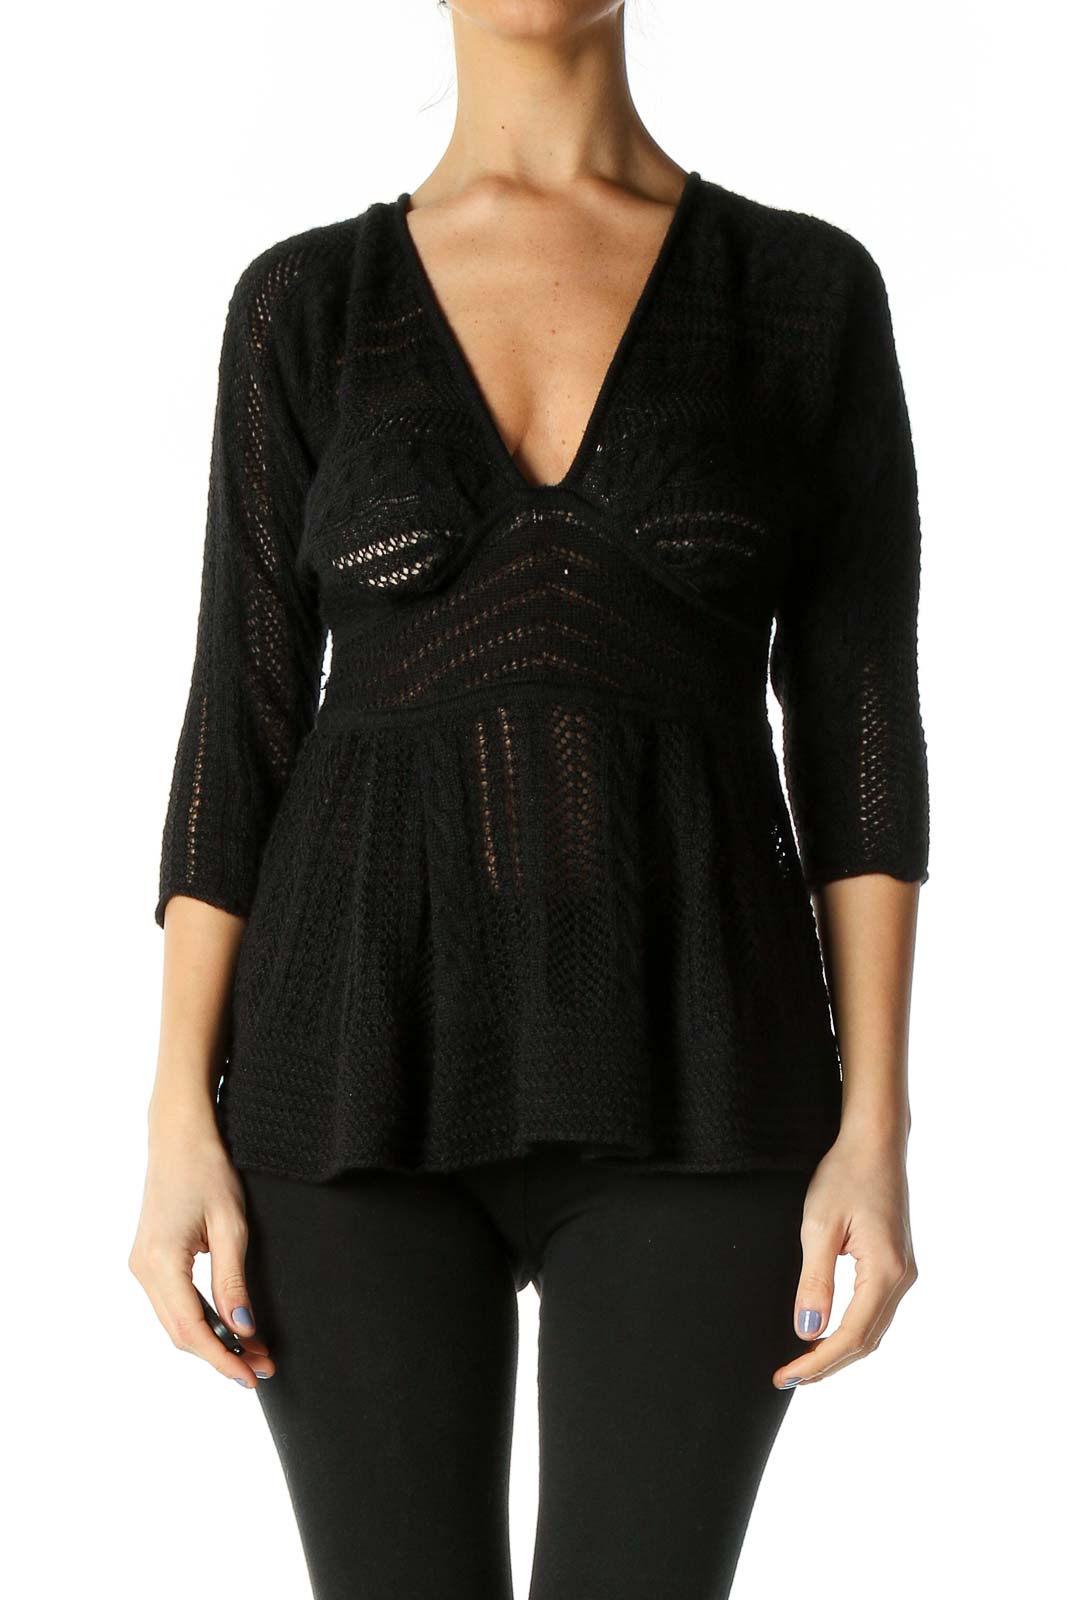 Black Solid Casual Blouse Front